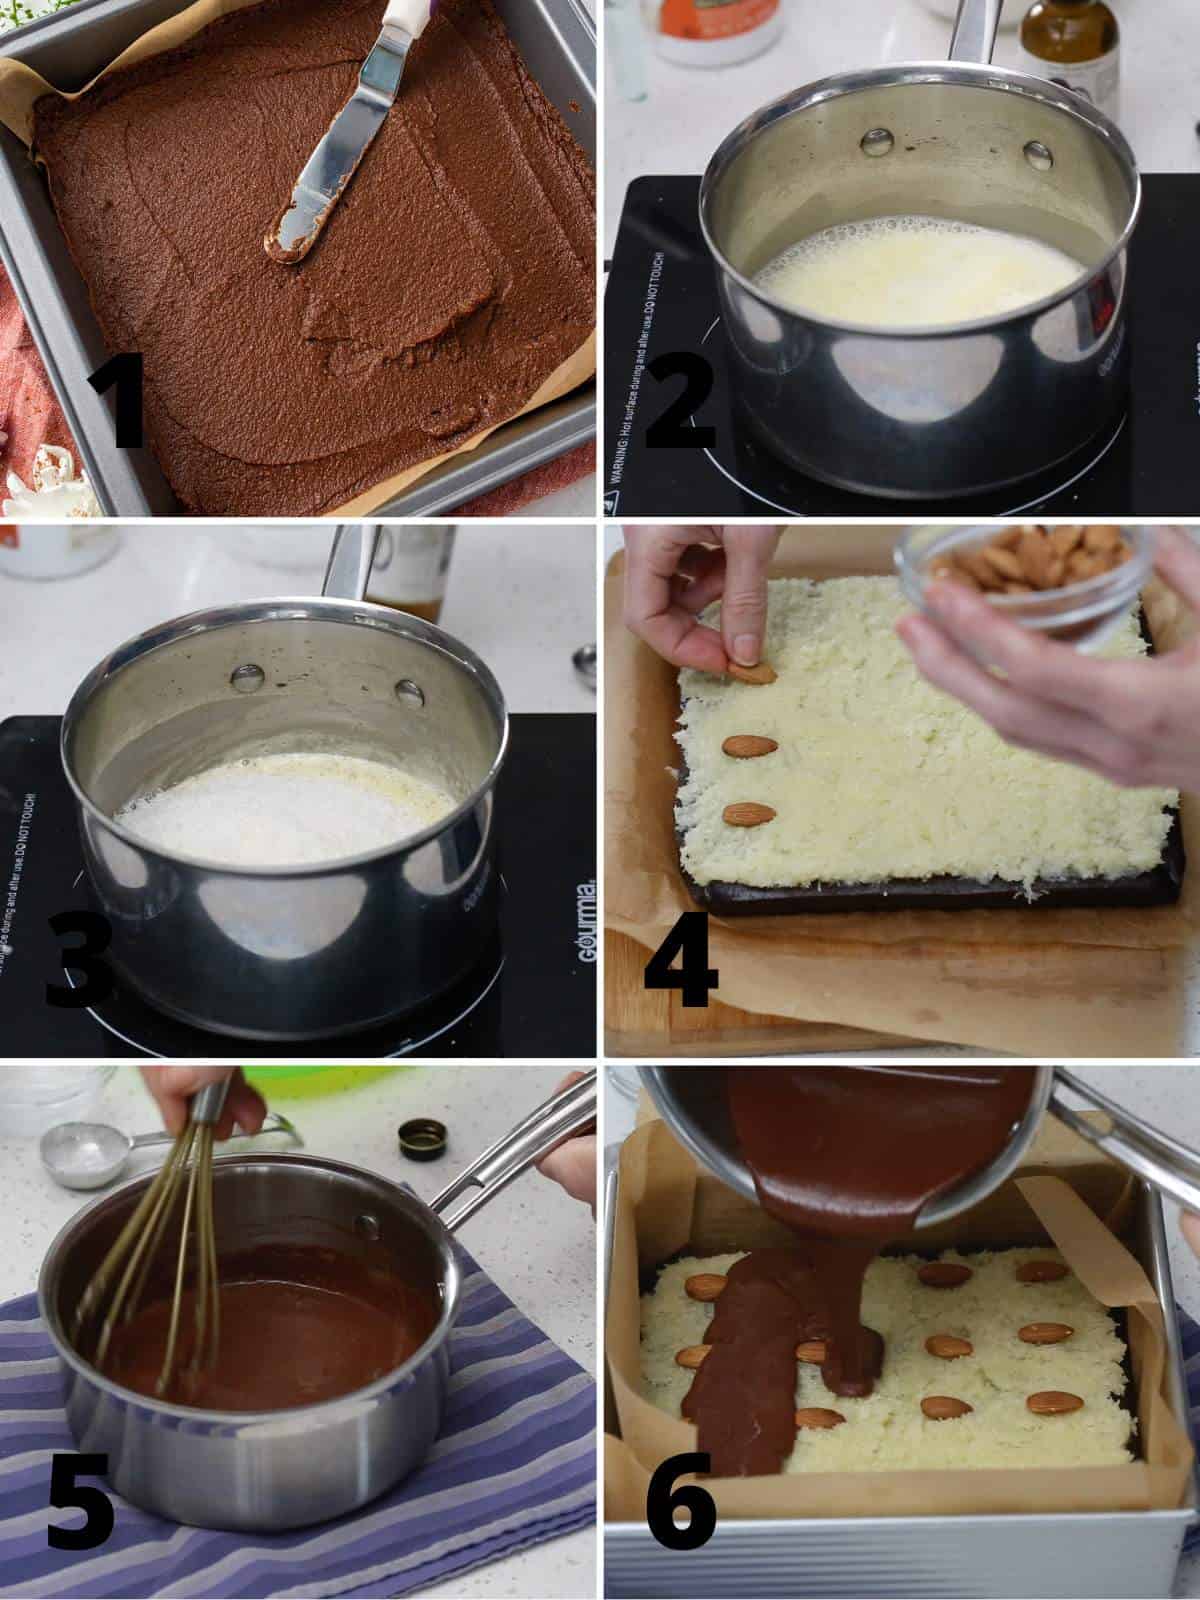 A collage of 6 images showing the steps for making keto almond joy brownies.